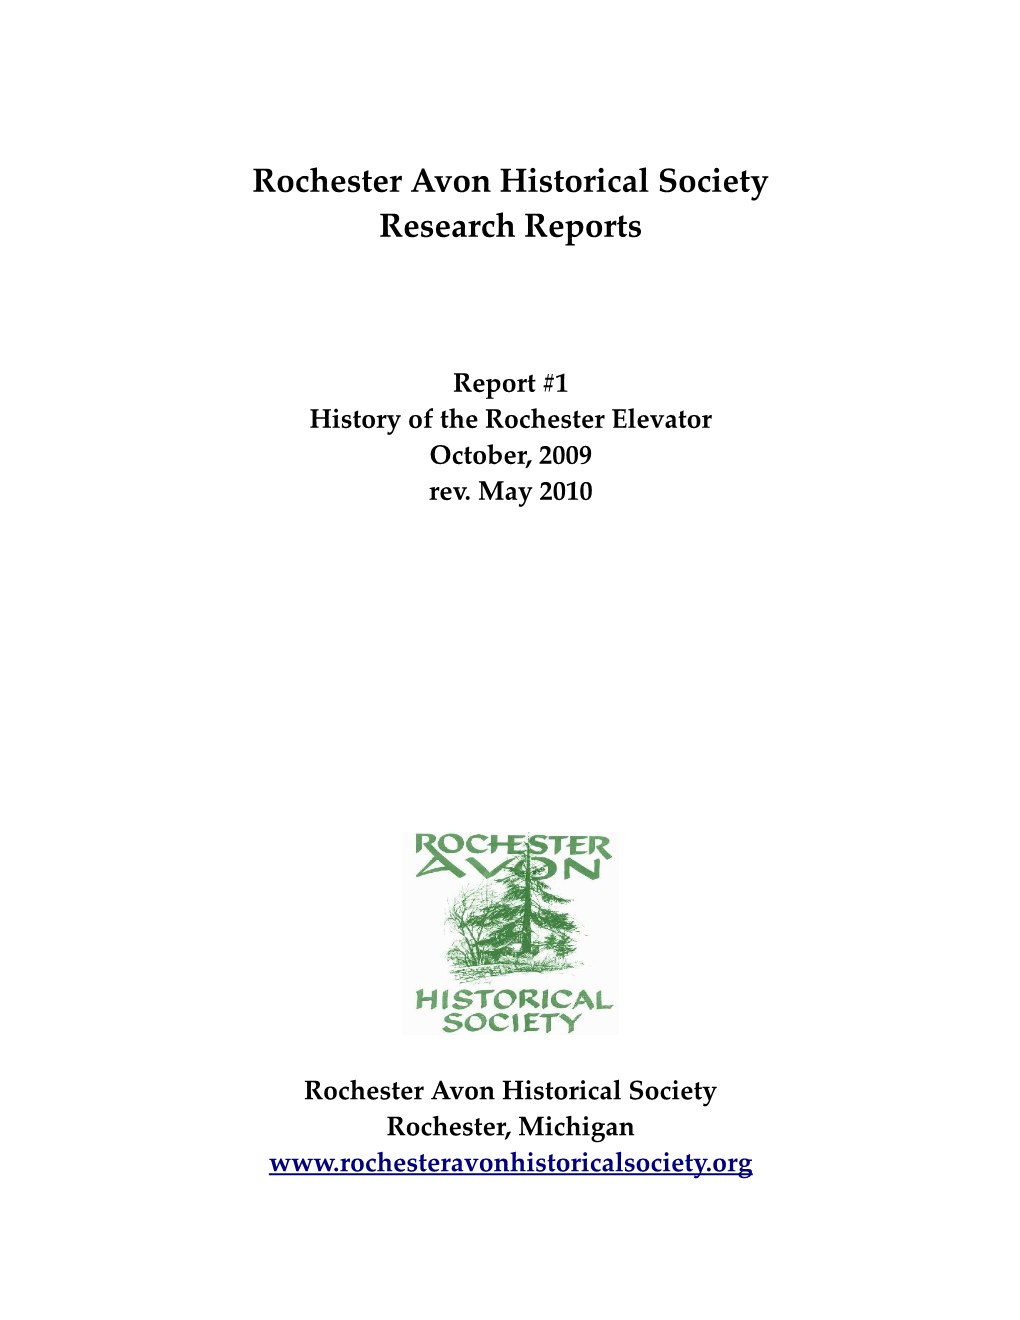 Report #1 History of the Rochester Elevator October, 2009 Rev. May 2010